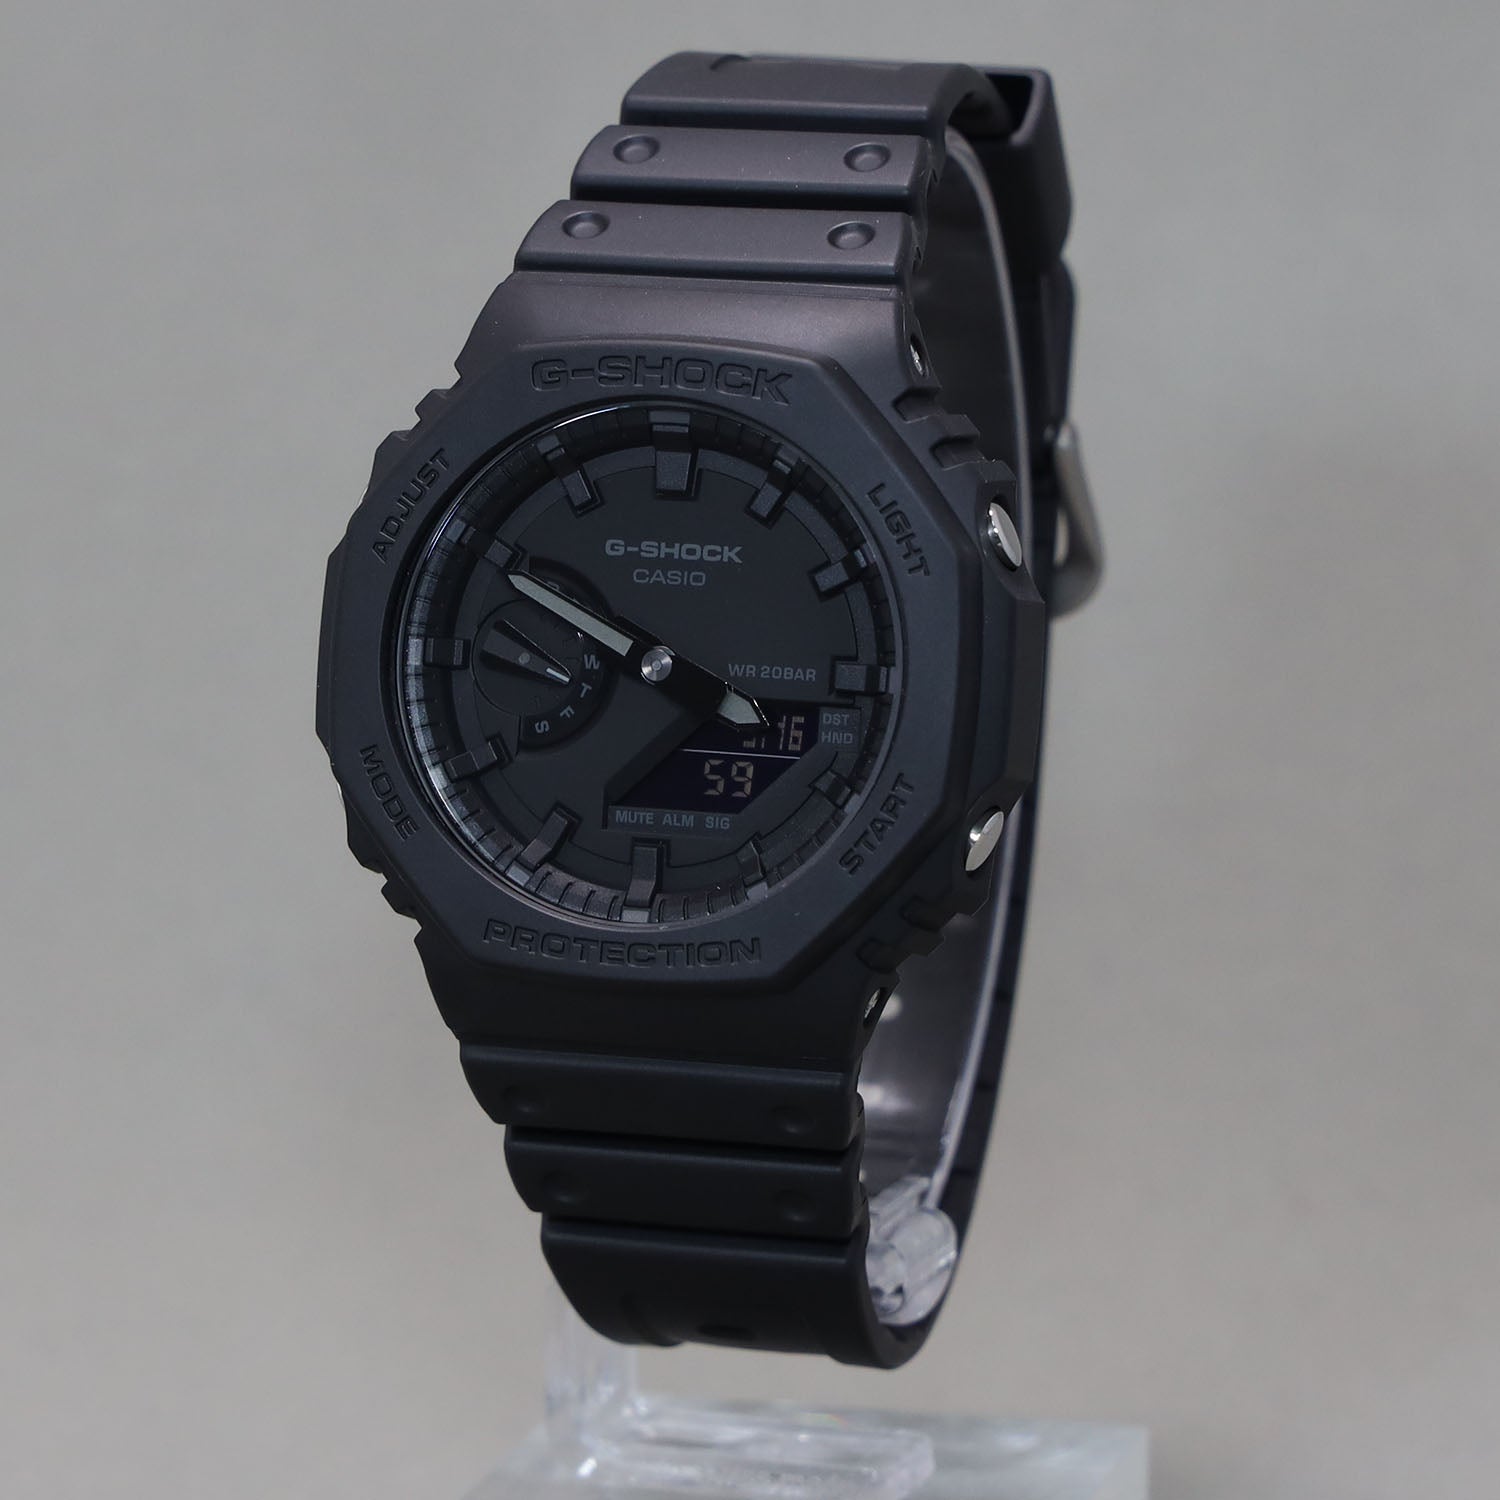 CASIO】G-SHOCK カーボンコアガード / GA-2100-1A1JF – CAR and DRIVER